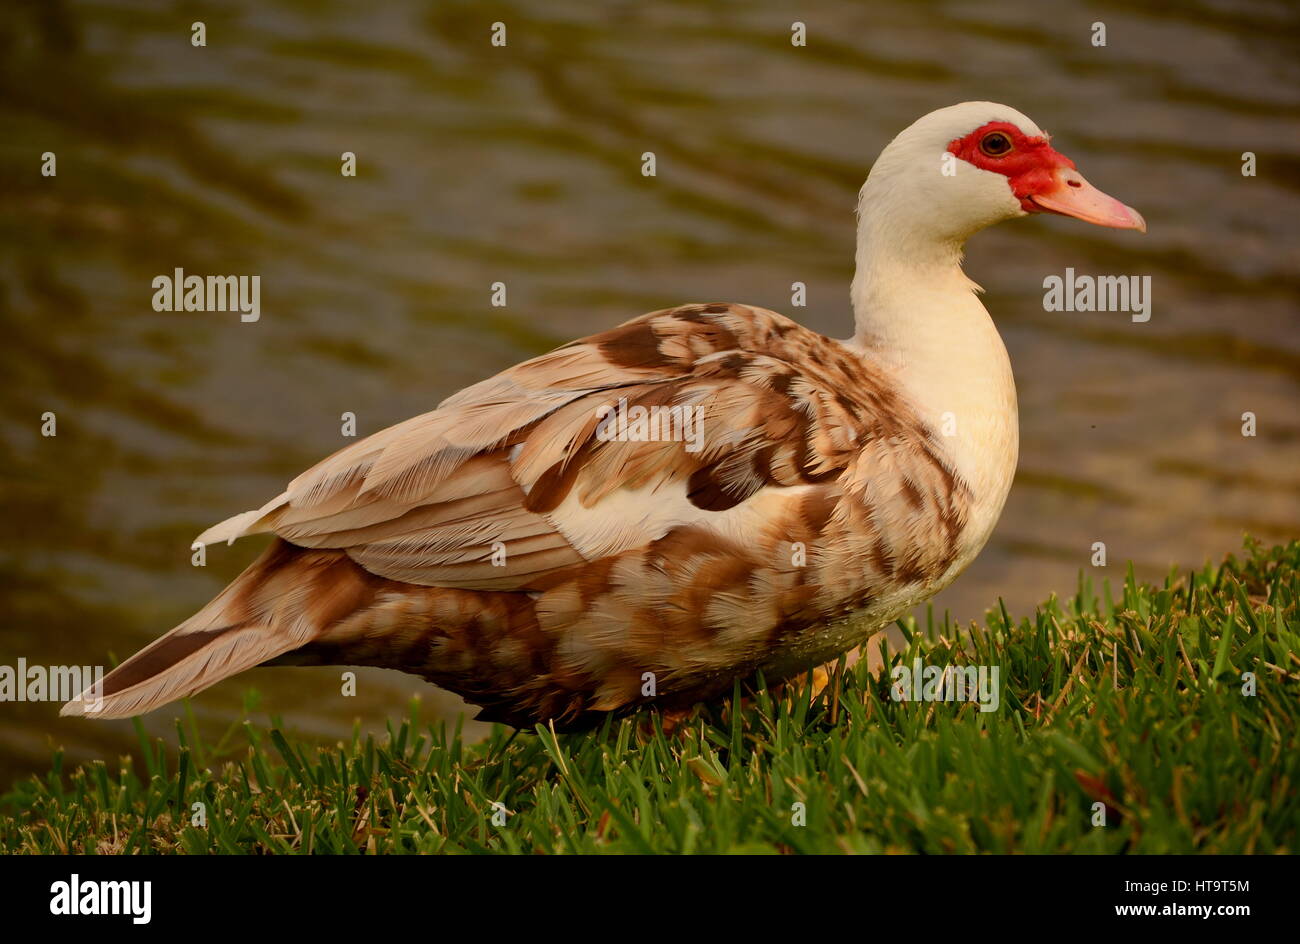 A large feral Muscovy duck exits a pond with water droplets clinging to its mottled plumage and slowly waddles up a grassy slope in Central Florida. Stock Photo